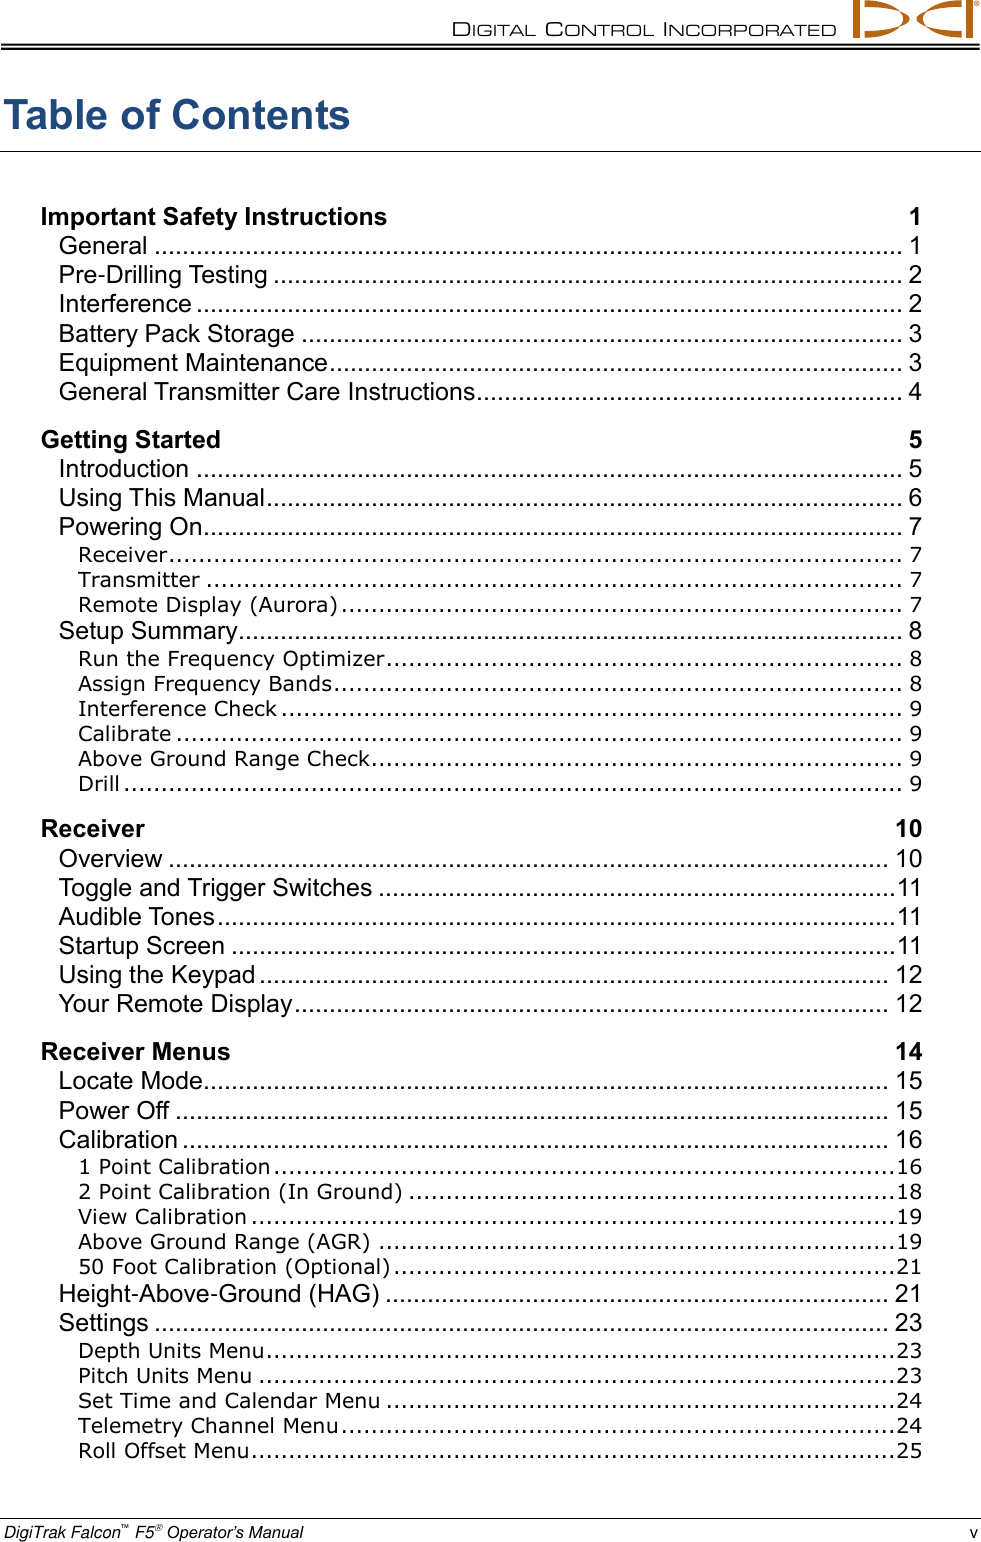 DIGITAL  CONTROL  INCORPORATED  DigiTrak Falcon™ F5 Operator’s Manual v Table of Contents Important Safety Instructions 1 General ........................................................................................................... 1 Pre-Drilling Testing .......................................................................................... 2 Interference ..................................................................................................... 2 Battery Pack Storage ...................................................................................... 3 Equipment Maintenance .................................................................................. 3 General Transmitter Care Instructions ............................................................. 4 Getting Started 5 Introduction ..................................................................................................... 5 Using This Manual ........................................................................................... 6 Powering On.................................................................................................... 7 Receiver .................................................................................................. 7 Transmitter ............................................................................................. 7 Remote Display (Aurora) ........................................................................... 7 Setup Summary ............................................................................................... 8 Run the Frequency Optimizer ..................................................................... 8 Assign Frequency Bands ............................................................................ 8 Interference Check ................................................................................... 9 Calibrate ................................................................................................. 9 Above Ground Range Check....................................................................... 9 Drill ........................................................................................................ 9 Receiver 10 Overview ....................................................................................................... 10 Toggle and Trigger Switches .......................................................................... 11 Audible Tones ................................................................................................. 11 Startup Screen ............................................................................................... 11 Using the Keypad .......................................................................................... 12 Your Remote Display ..................................................................................... 12 Receiver Menus 14 Locate Mode.................................................................................................. 15 Power Off ...................................................................................................... 15 Calibration ..................................................................................................... 16 1 Point Calibration ................................................................................... 16 2 Point Calibration (In Ground) ................................................................. 18 View Calibration ...................................................................................... 19 Above Ground Range (AGR) ..................................................................... 19 50 Foot Calibration (Optional) ................................................................... 21 Height-Above-Ground (HAG) ........................................................................ 21 Settings ......................................................................................................... 23 Depth Units Menu .................................................................................... 23 Pitch Units Menu ..................................................................................... 23 Set Time and Calendar Menu .................................................................... 24 Telemetry Channel Menu .......................................................................... 24 Roll Offset Menu ...................................................................................... 25 